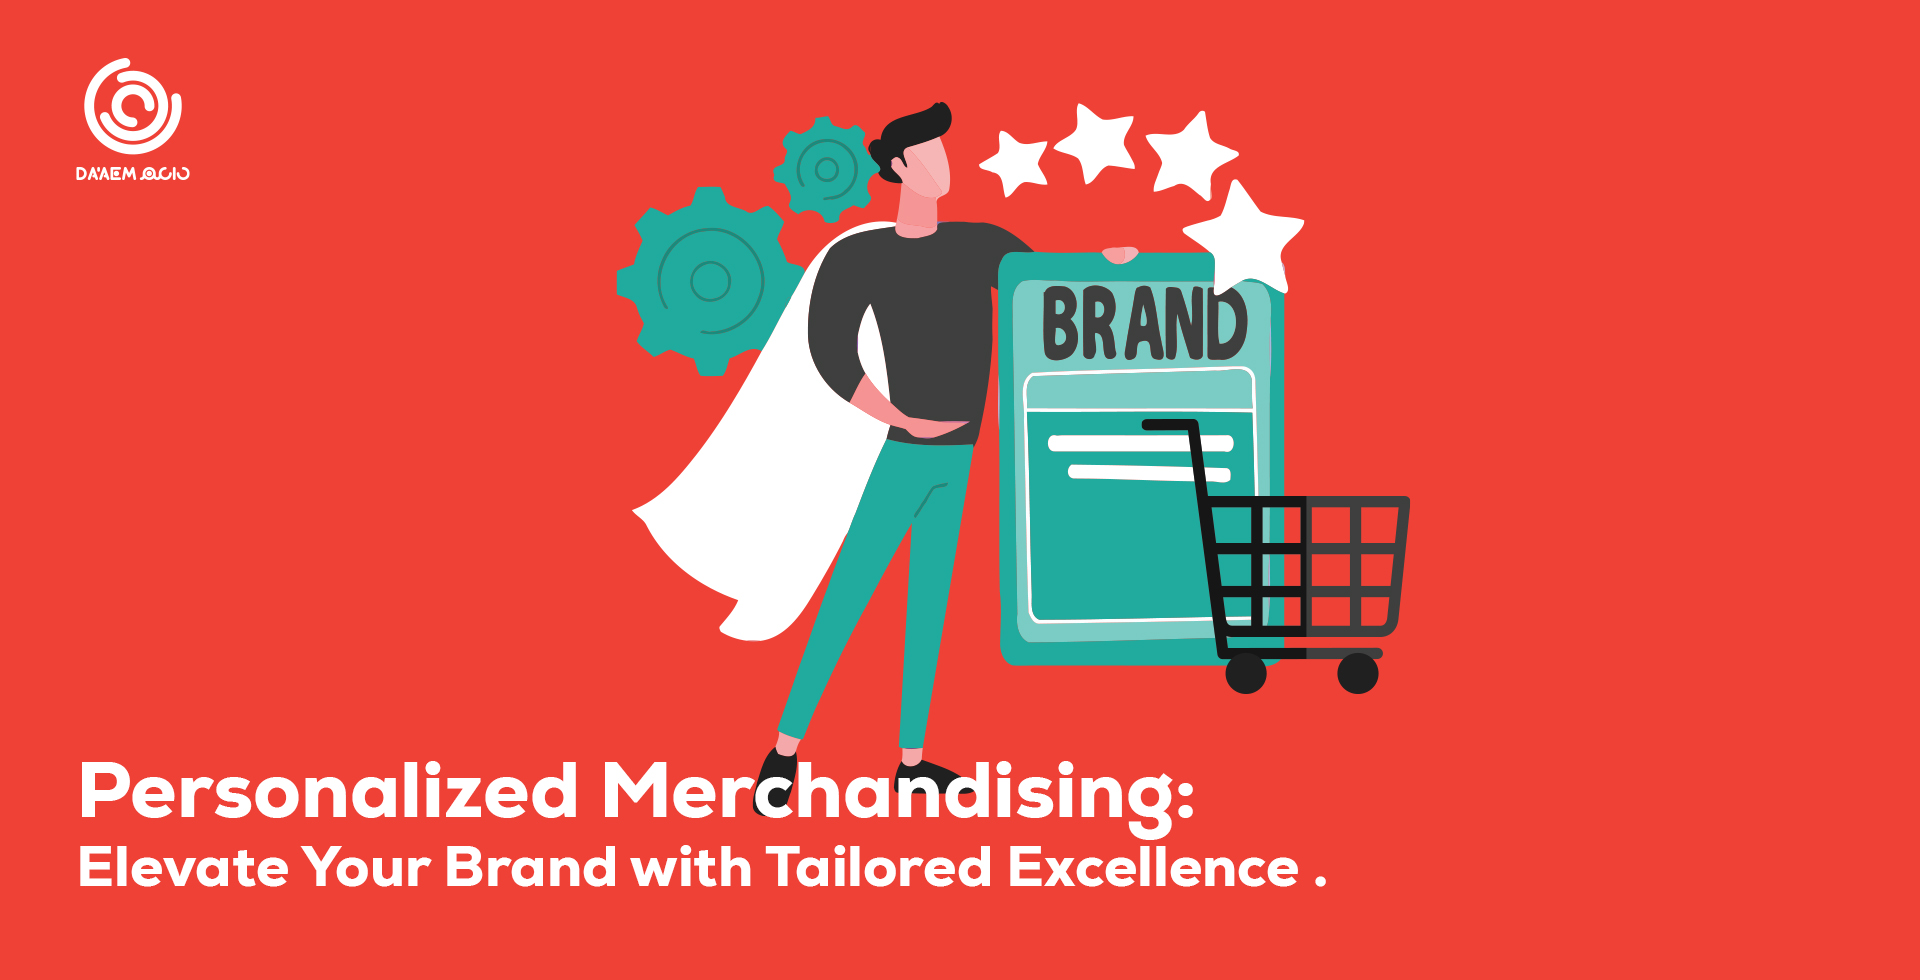  Personalized Merchandising: Elevate Your Brand with Tailored Excellence